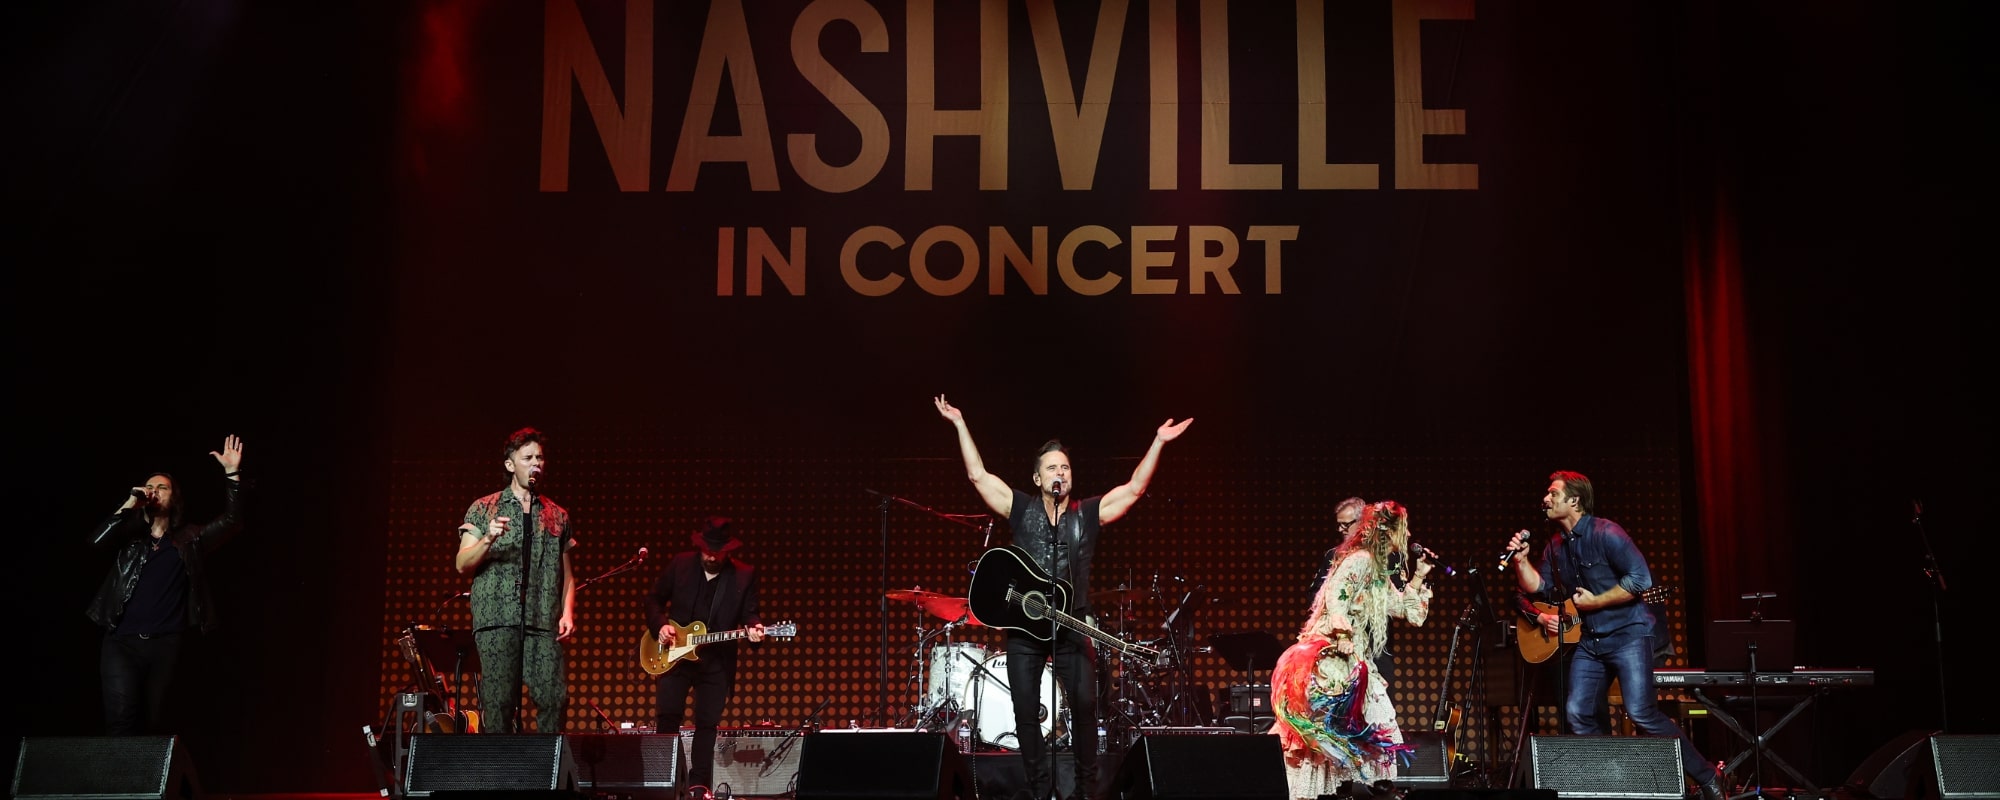 Watch: Charles Esten and ‘Nashville’ Co-Stars Perform “Down the Road” in Glasgow During Reunion Tour